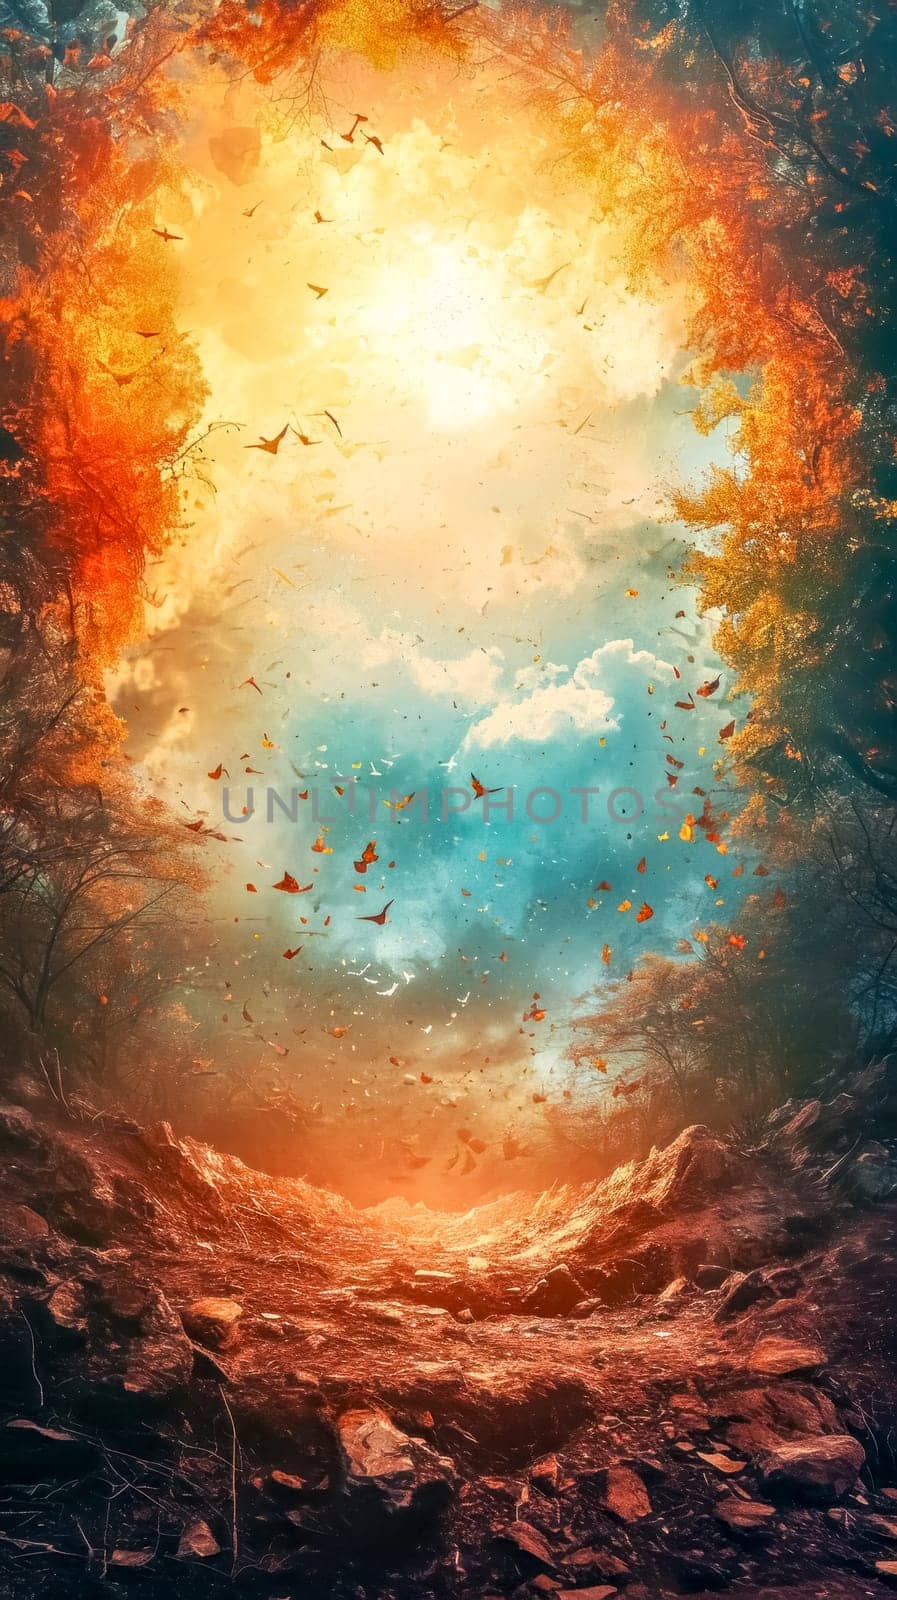 breathtaking scene of a forest path leading to a radiant, sunlit clearing, with fiery autumn leaves swirling in the air, suggesting a magical journey or transformation, vertical, copy space